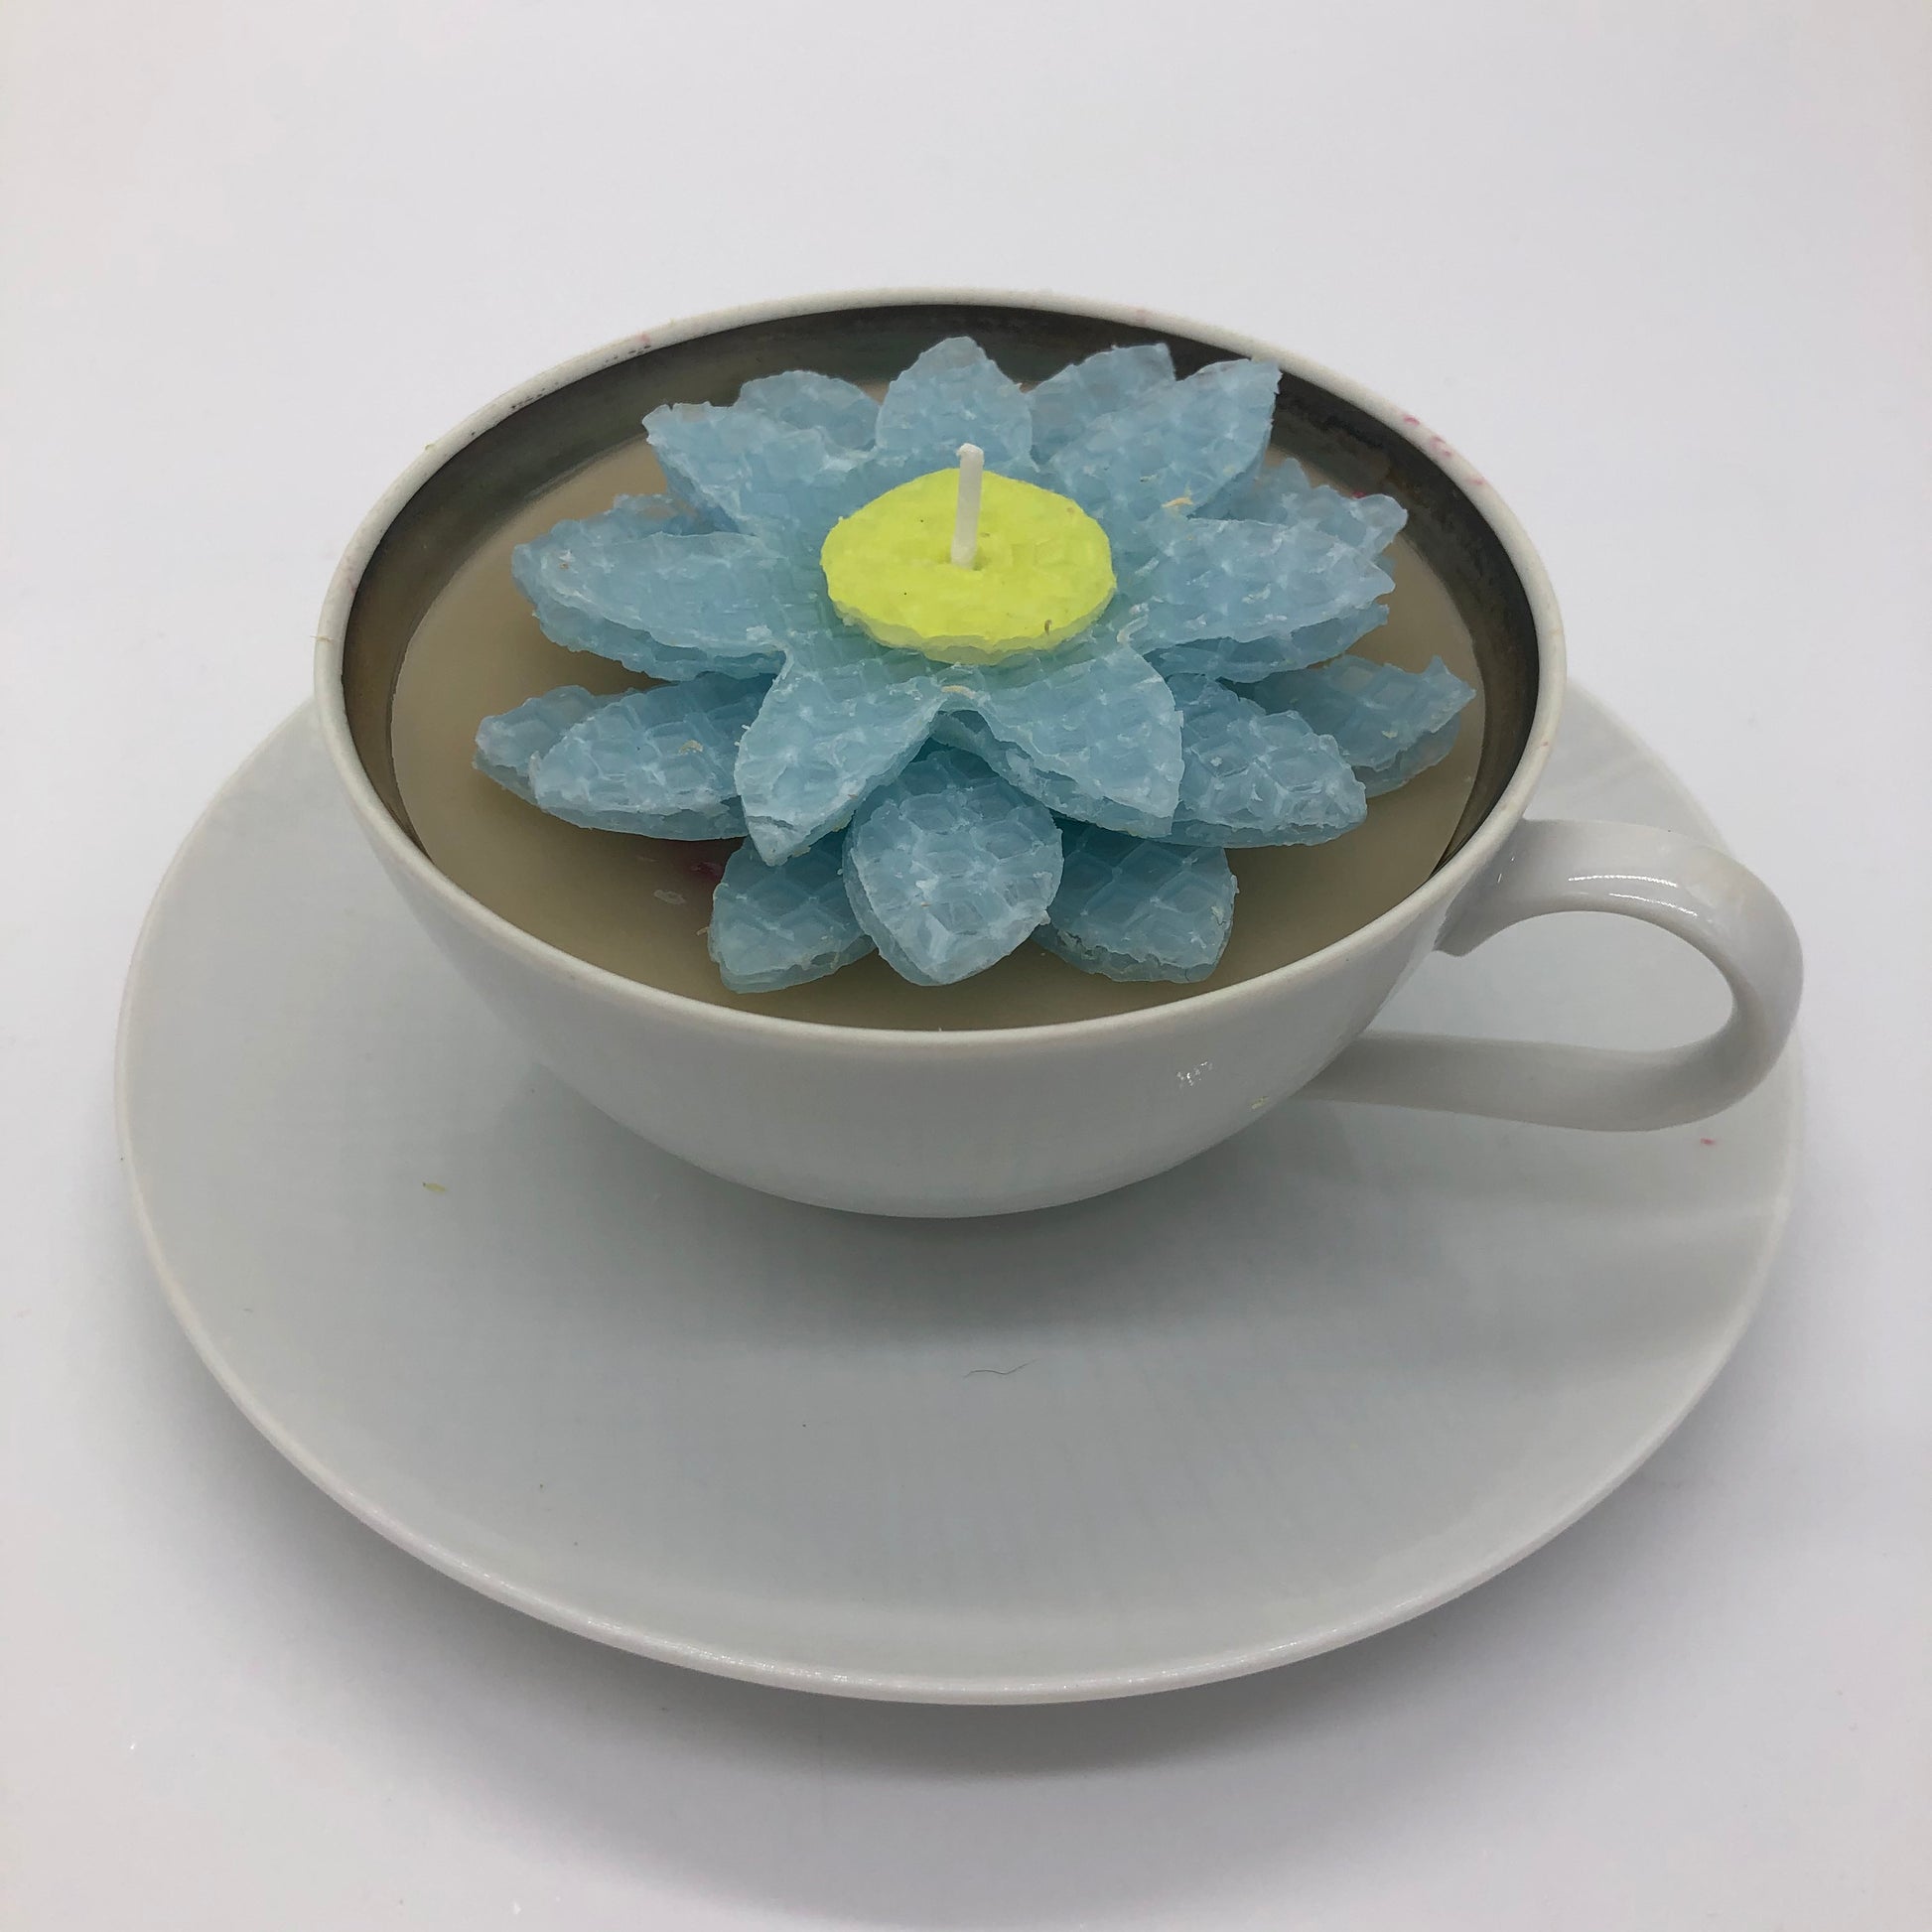 All white teacup and saucer with light colored candle inside.  Top of candle is decorated with a multilayer light blue flower with yellow center made of beeswax sheets.